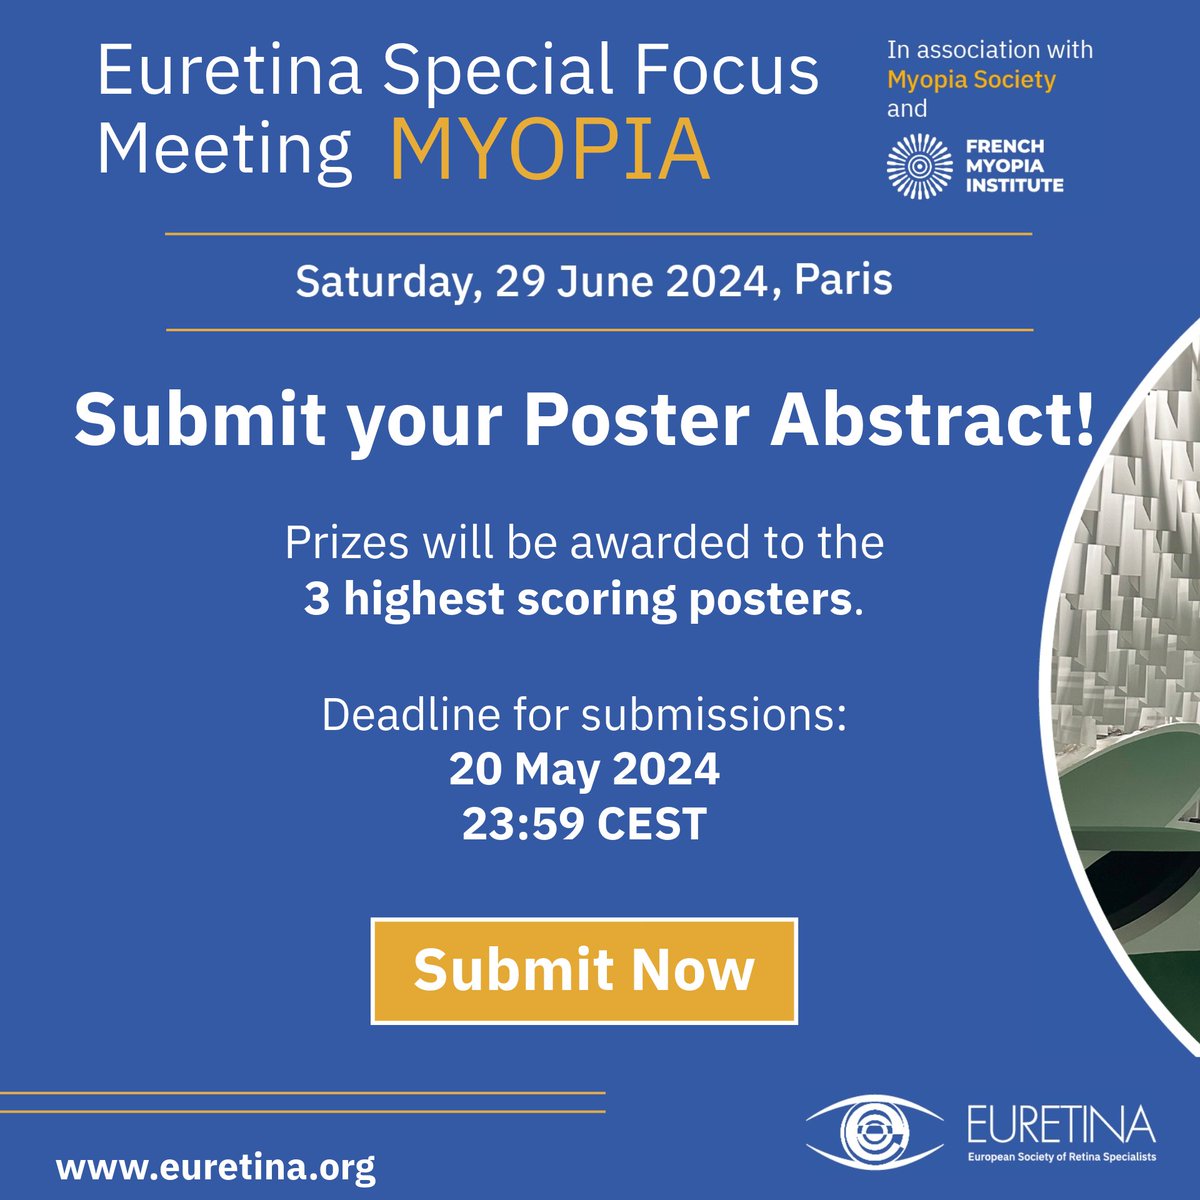 🌟 Today is the FINAL DAY to submit your abstract for the Euretina Special Focus Meeting on Myopia in Paris! Join fellow experts from around the world who've already submitted their groundbreaking work. Submit now: ow.ly/xtRY50RMI77 #EuretinaSpecialFocus #Myopia